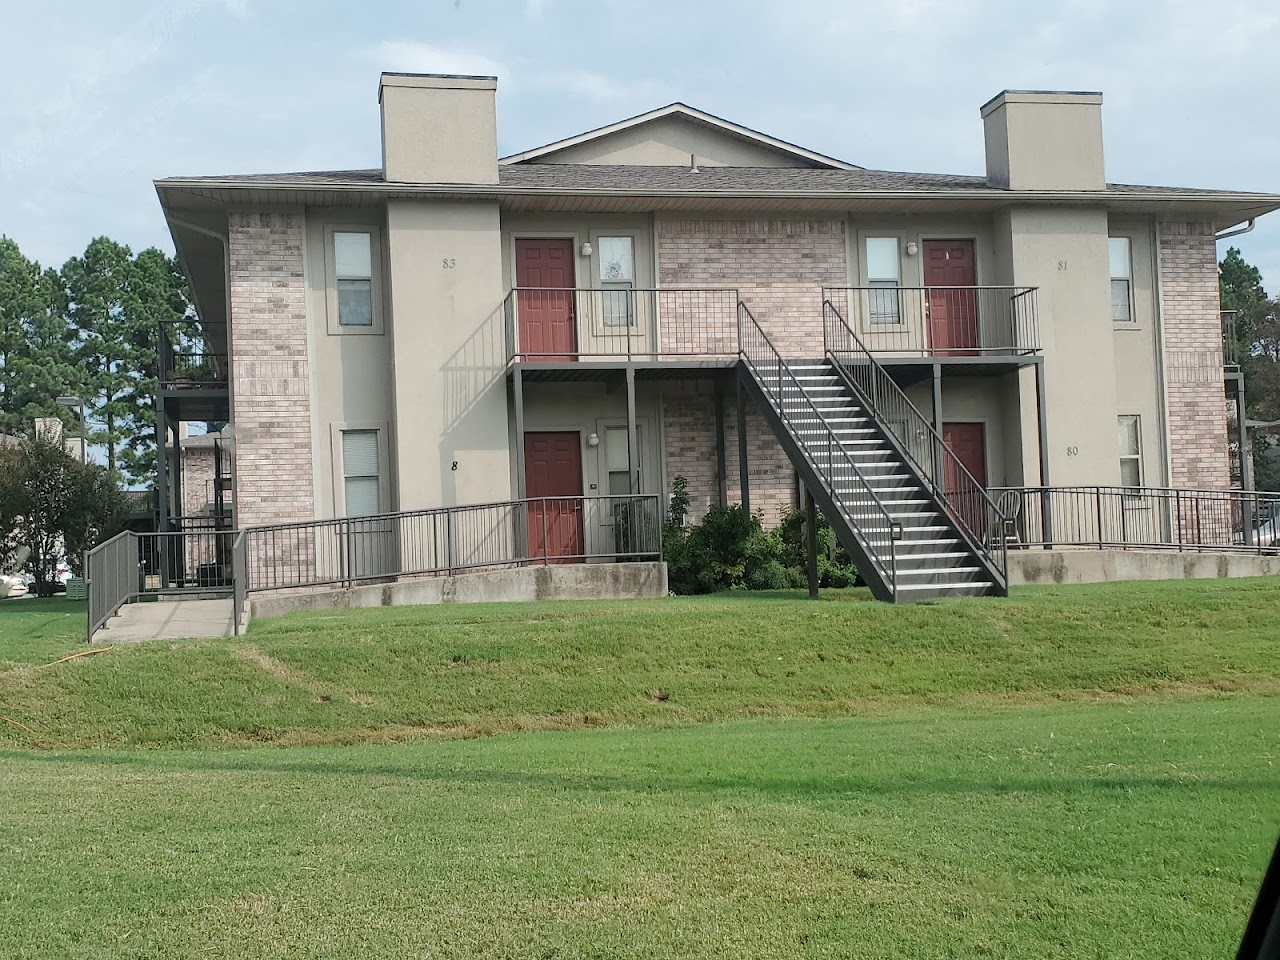 Photo of WOODLAND STATION SENIOR APTS. Affordable housing located at 8 SHANE DR CABOT, AR 72023